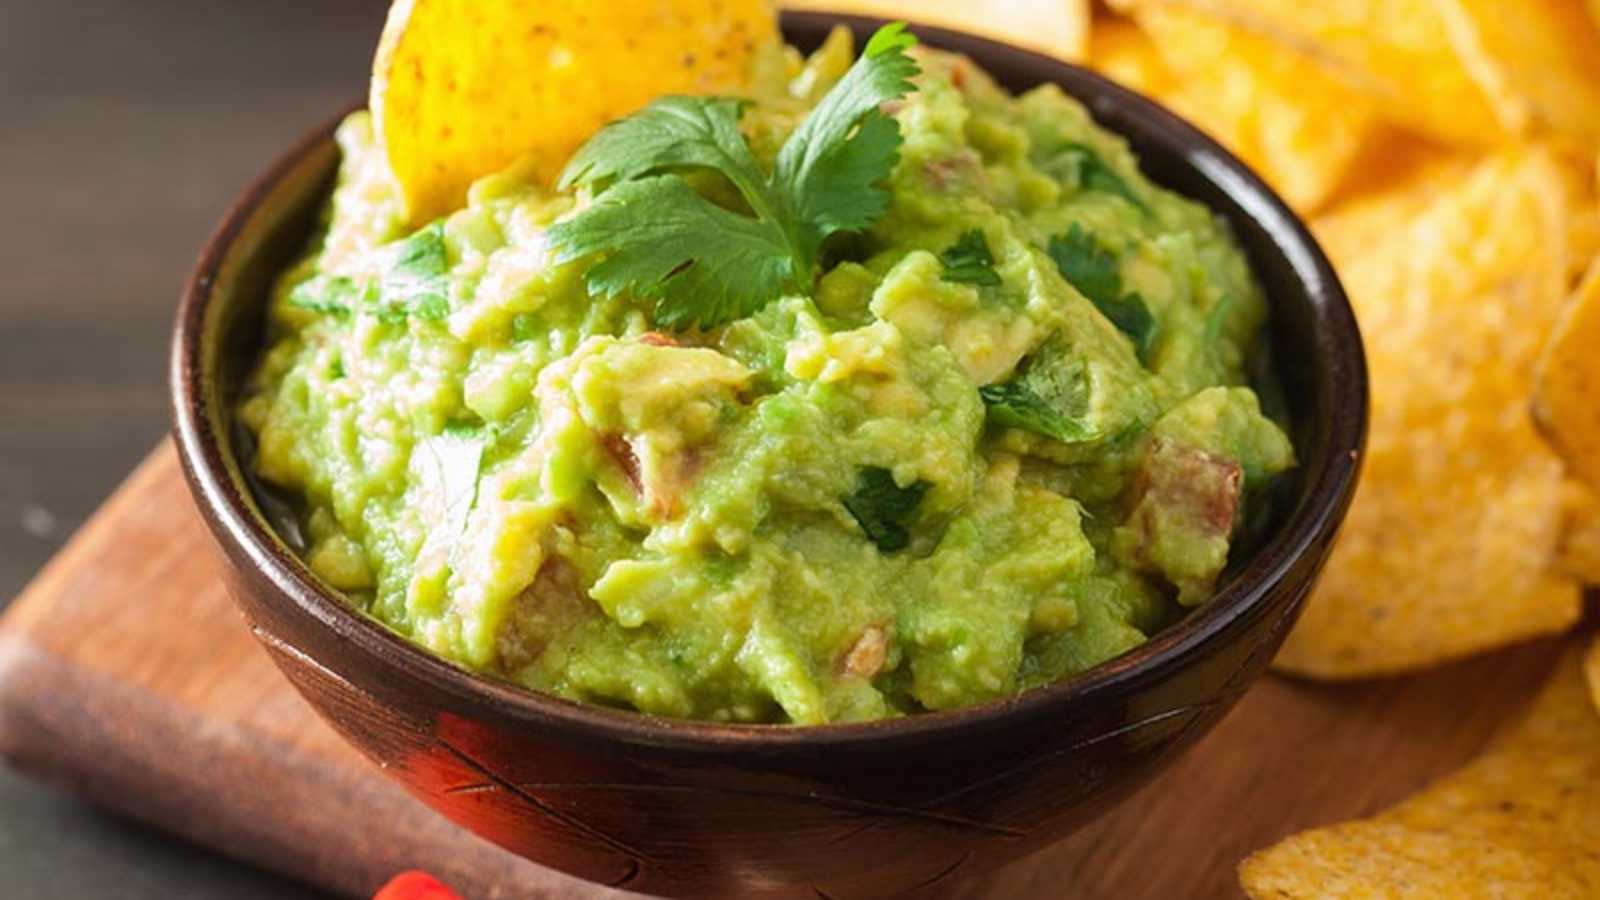 Two bowls of guacamole on tray with chips and various ingredients.